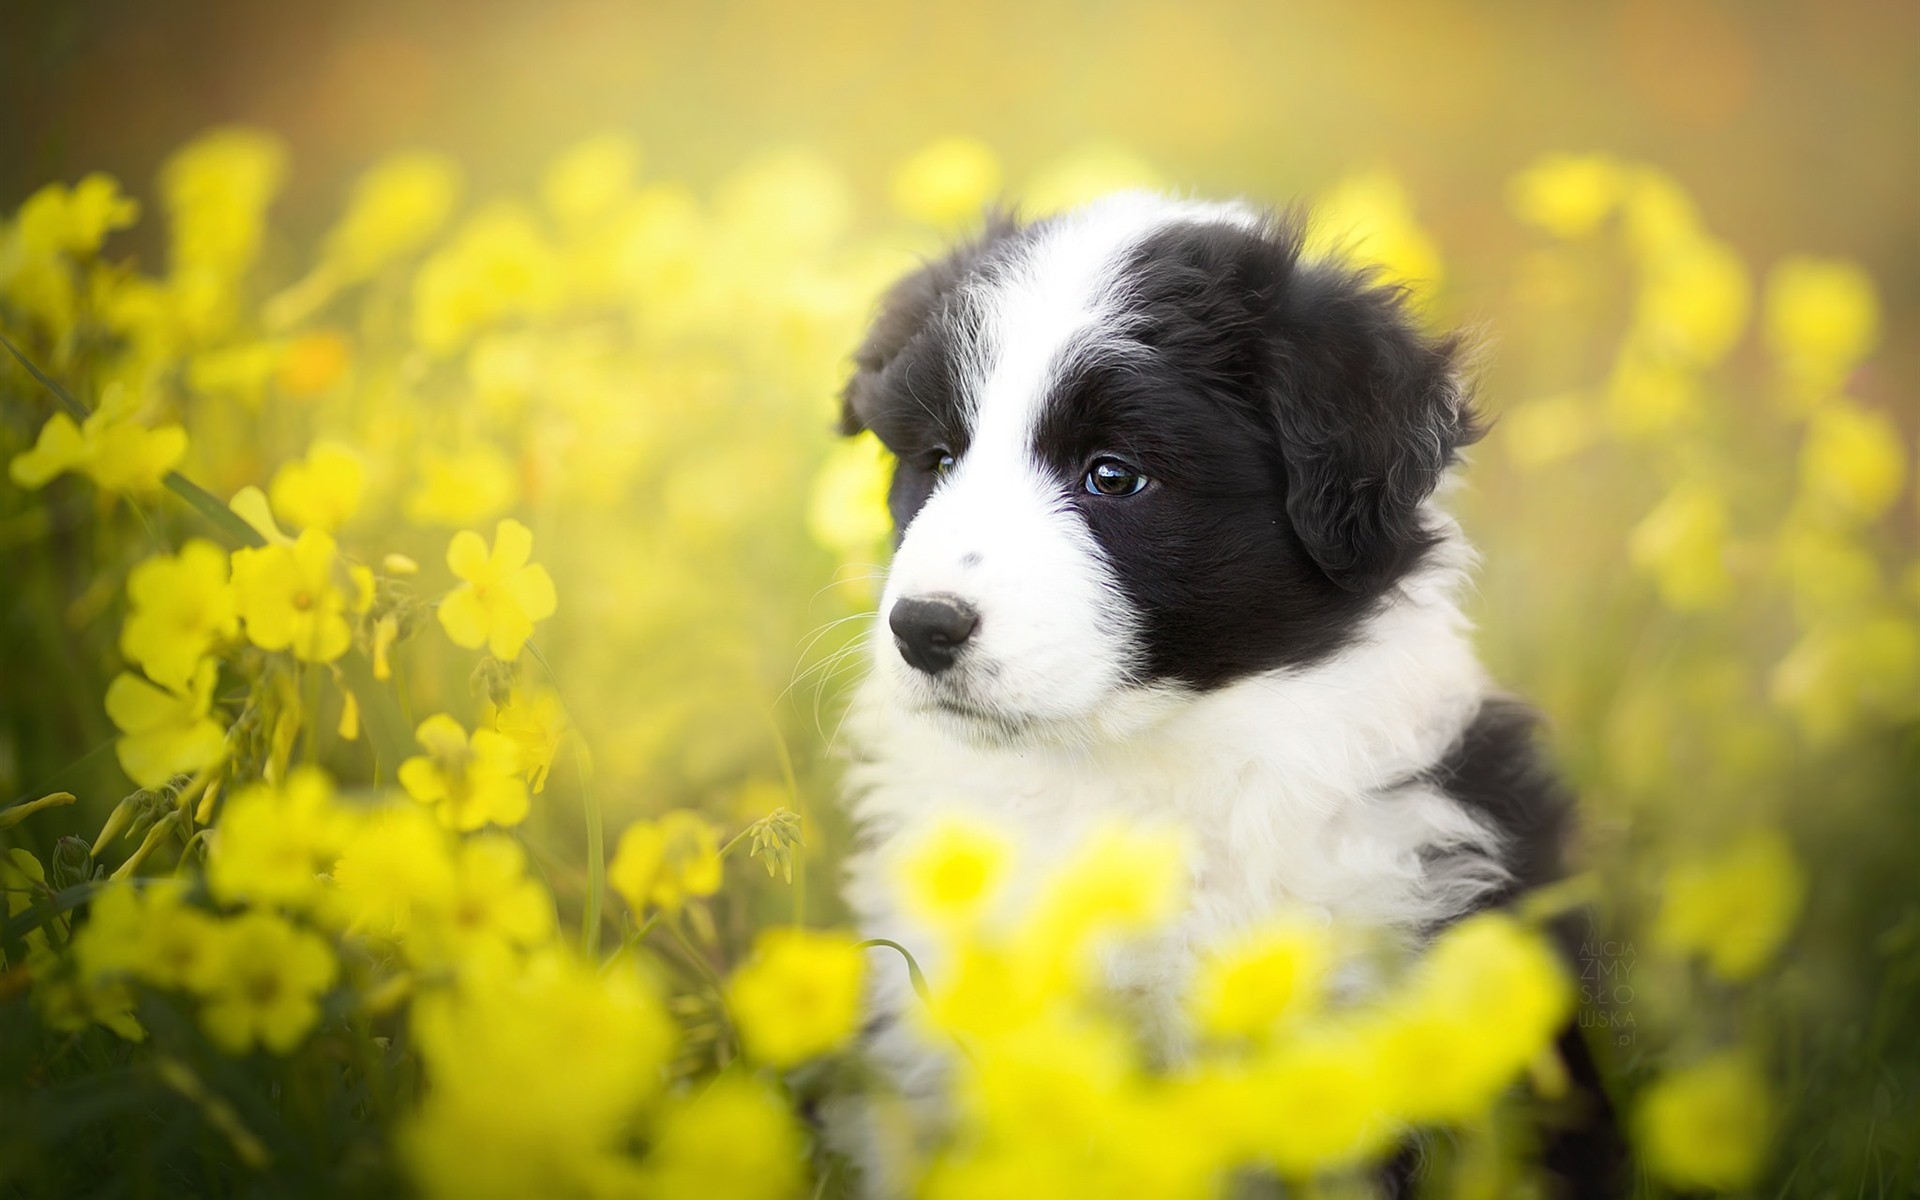 Wallpapers wallpaper cute dog yellow flowers puppy on the desktop